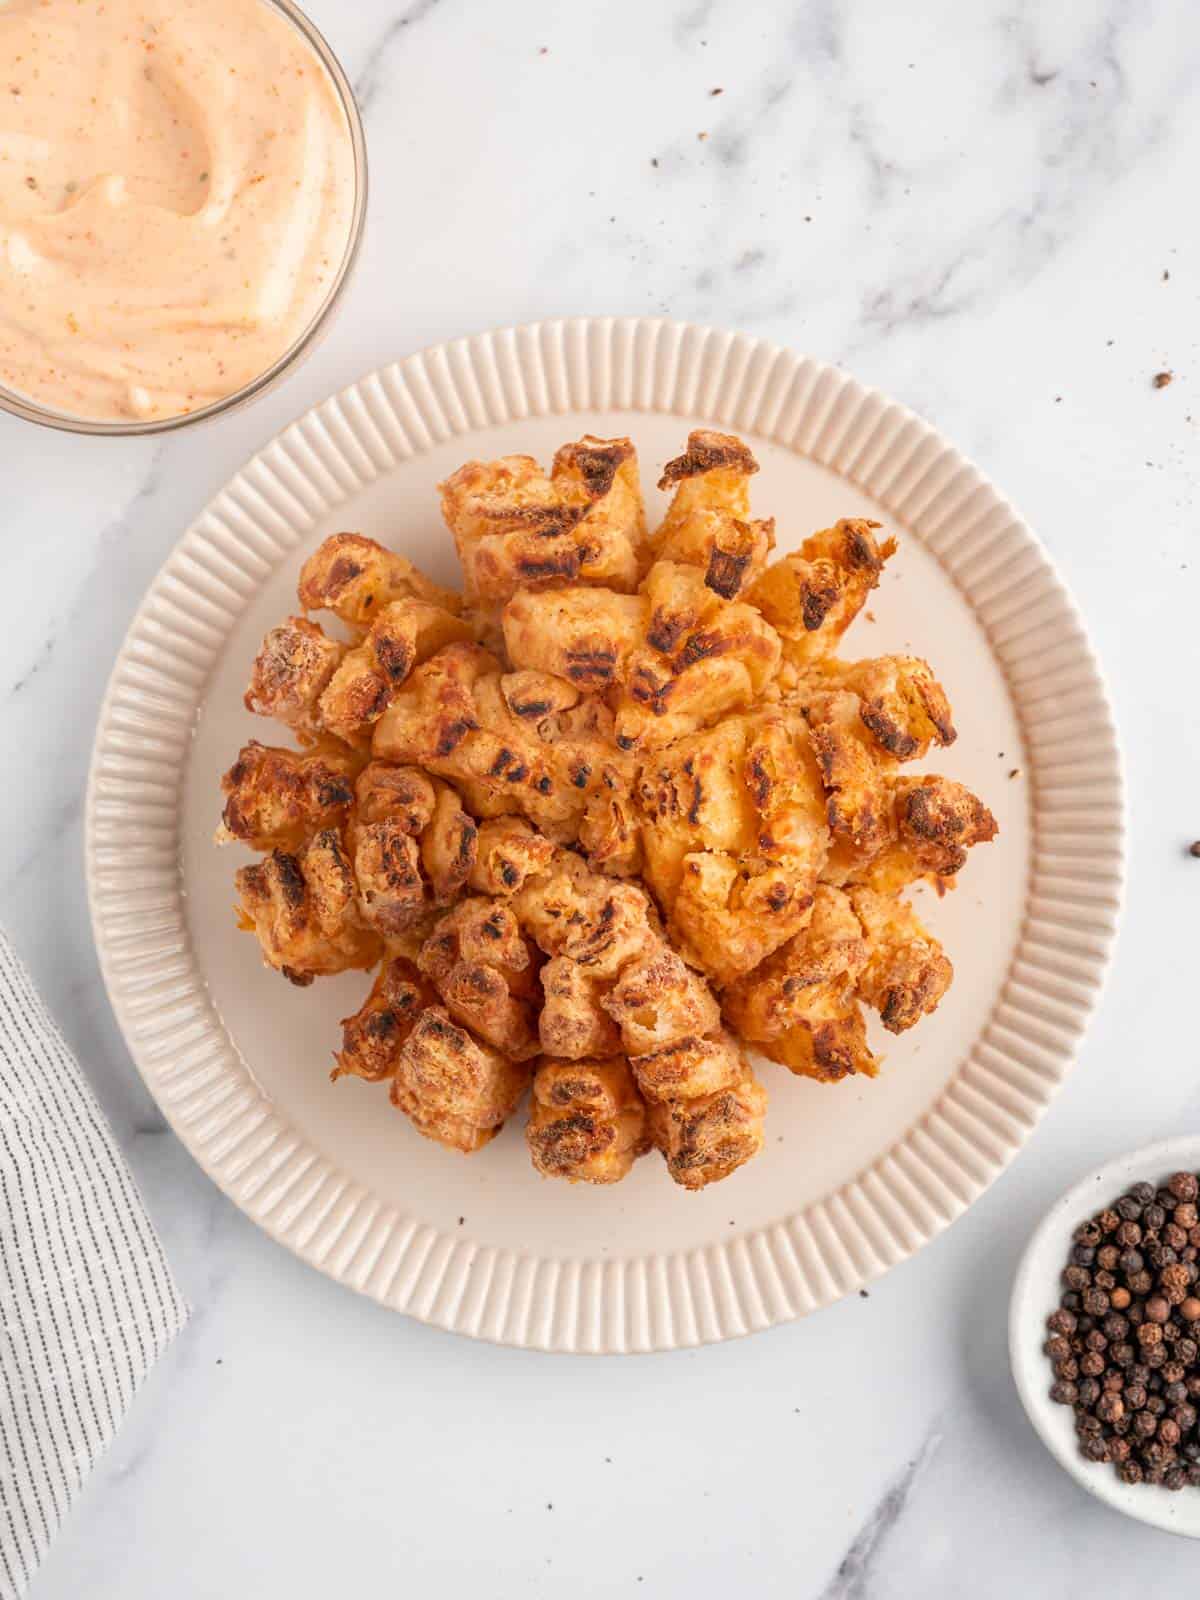 https://www.cookinwithmima.com/wp-content/uploads/2022/12/blooming-onion-air-fryer.jpg